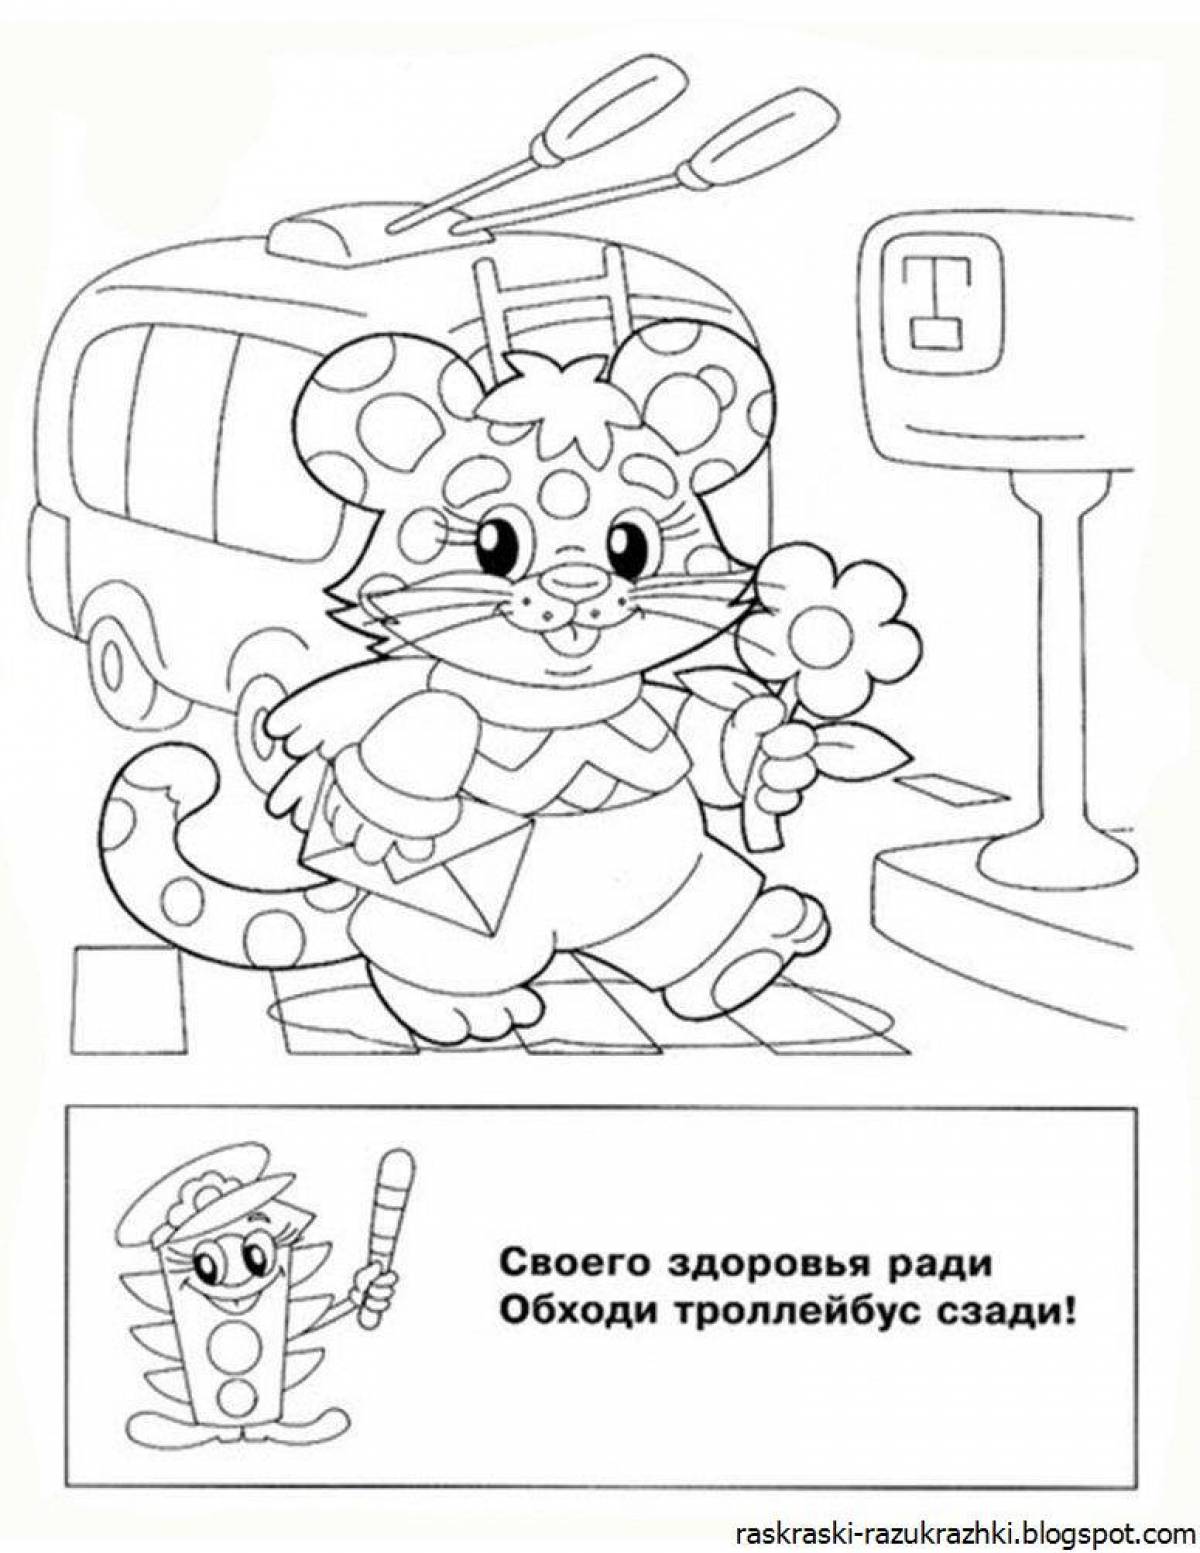 Tempting rules of the road coloring book